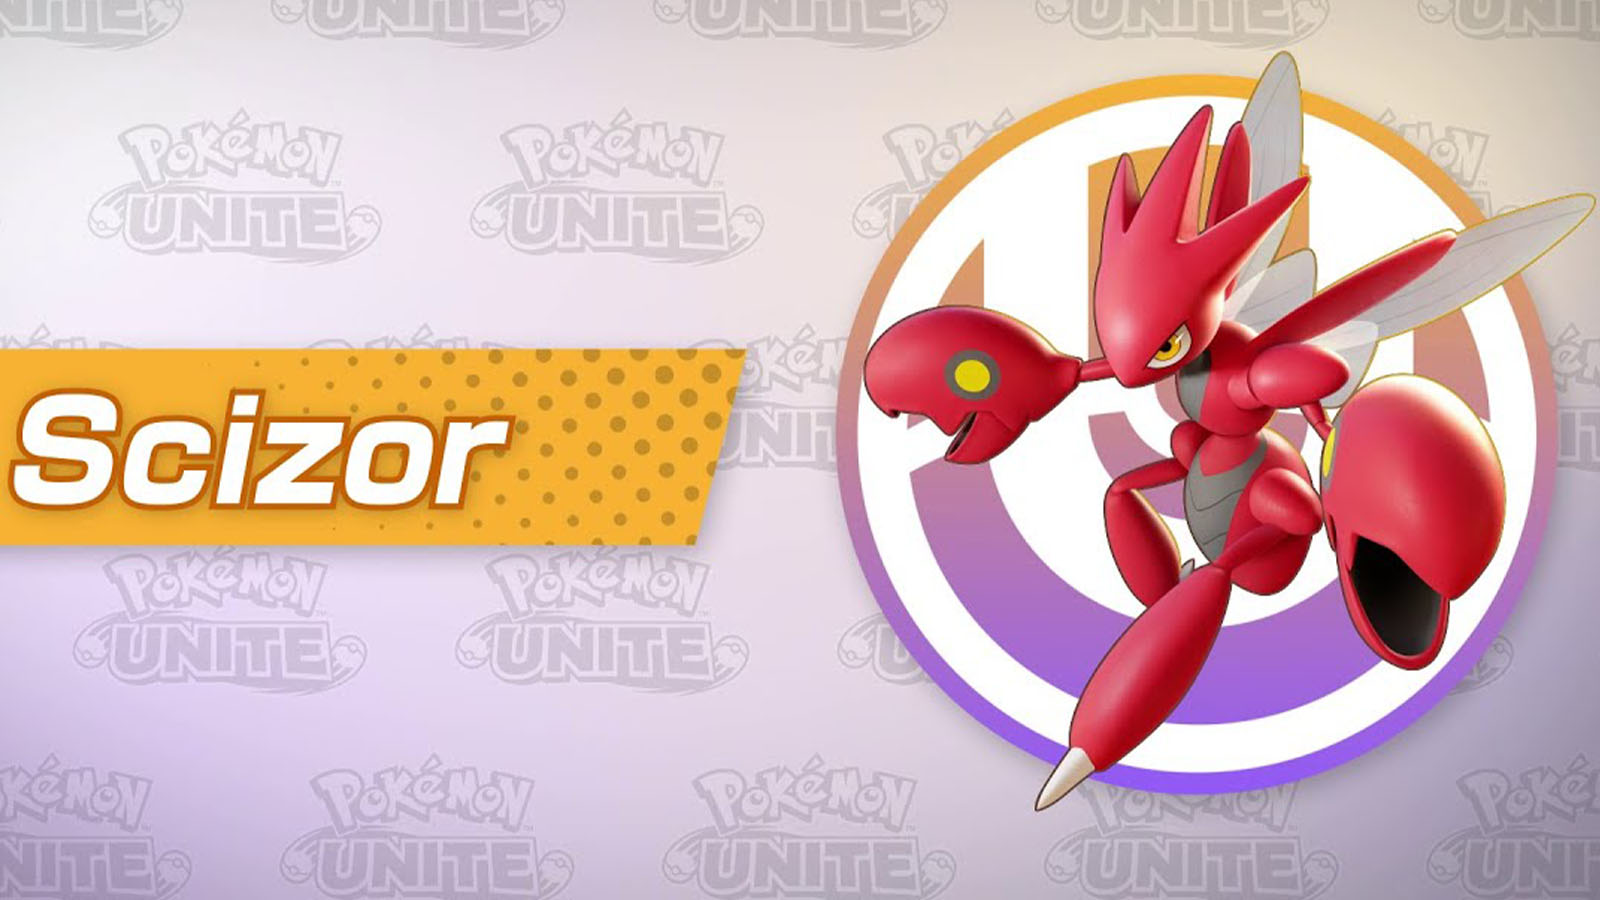 Pokemon Unite Mew guide: Best movesets, builds, items, and more